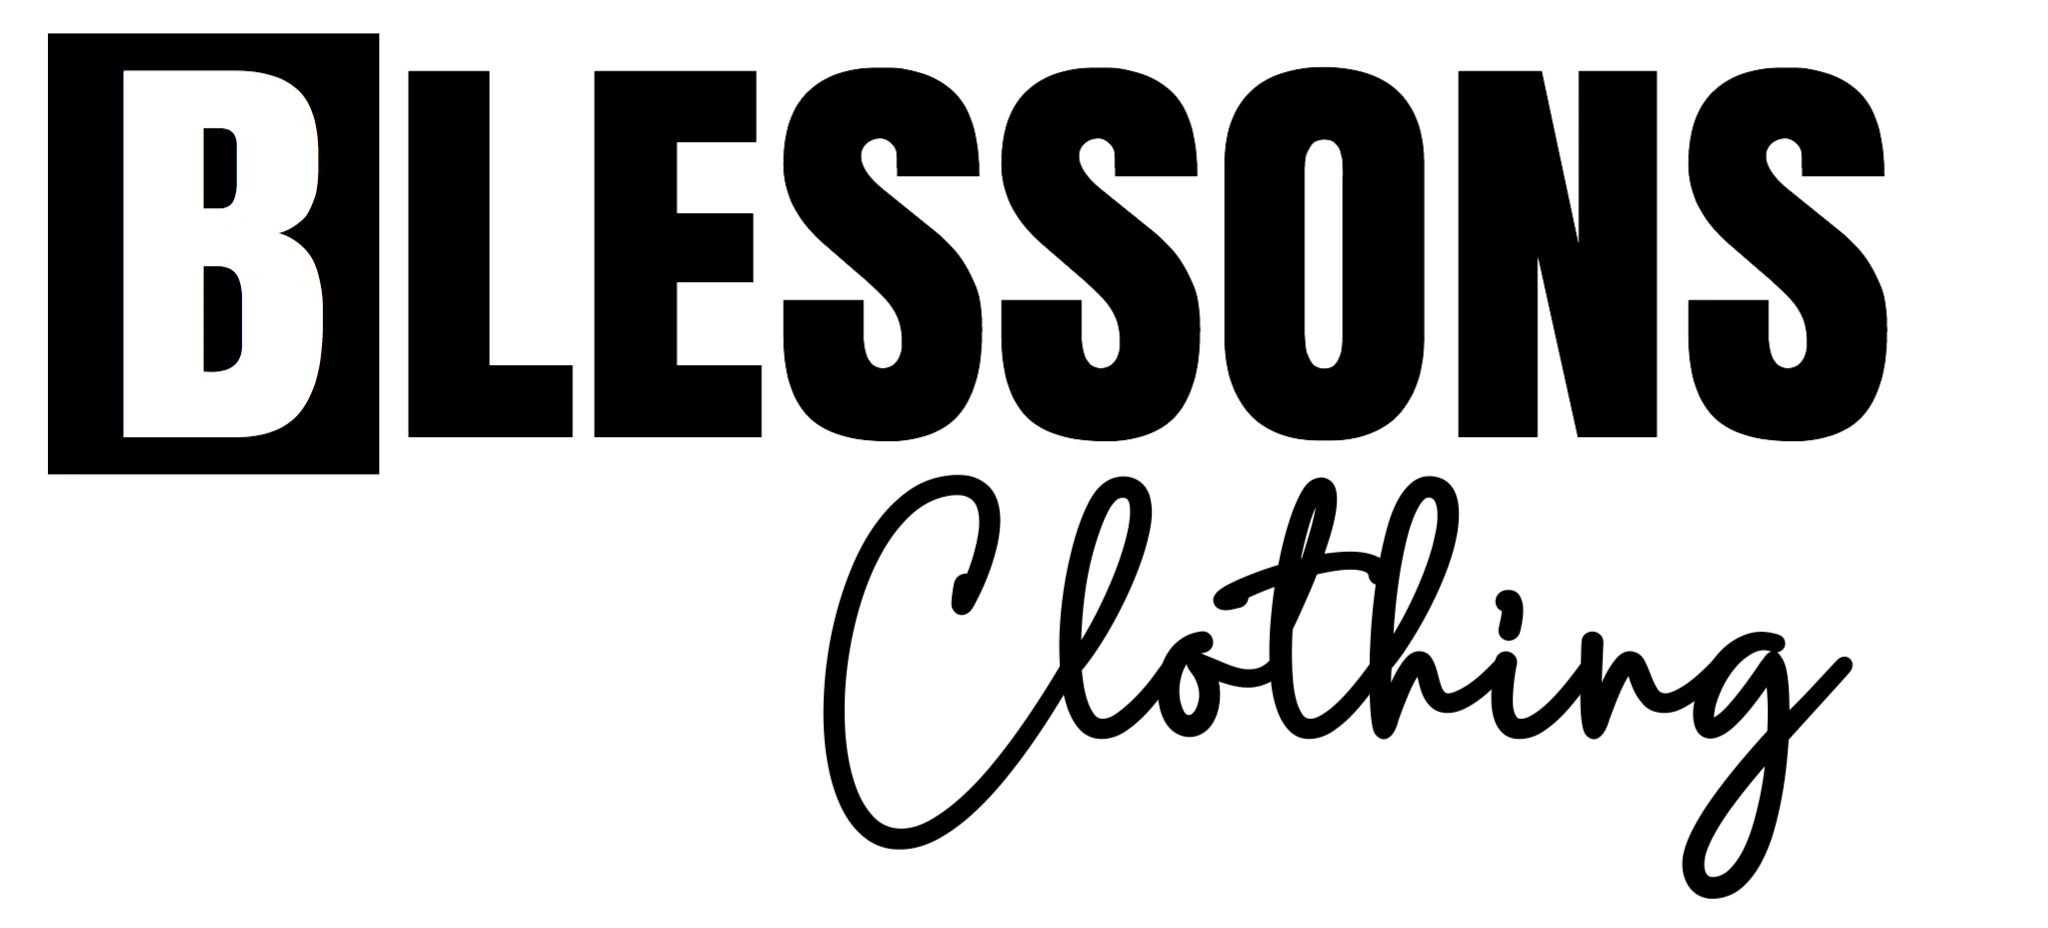 Blessons Clothing - Print on Demand, Fulfillment, T Shirt Printing